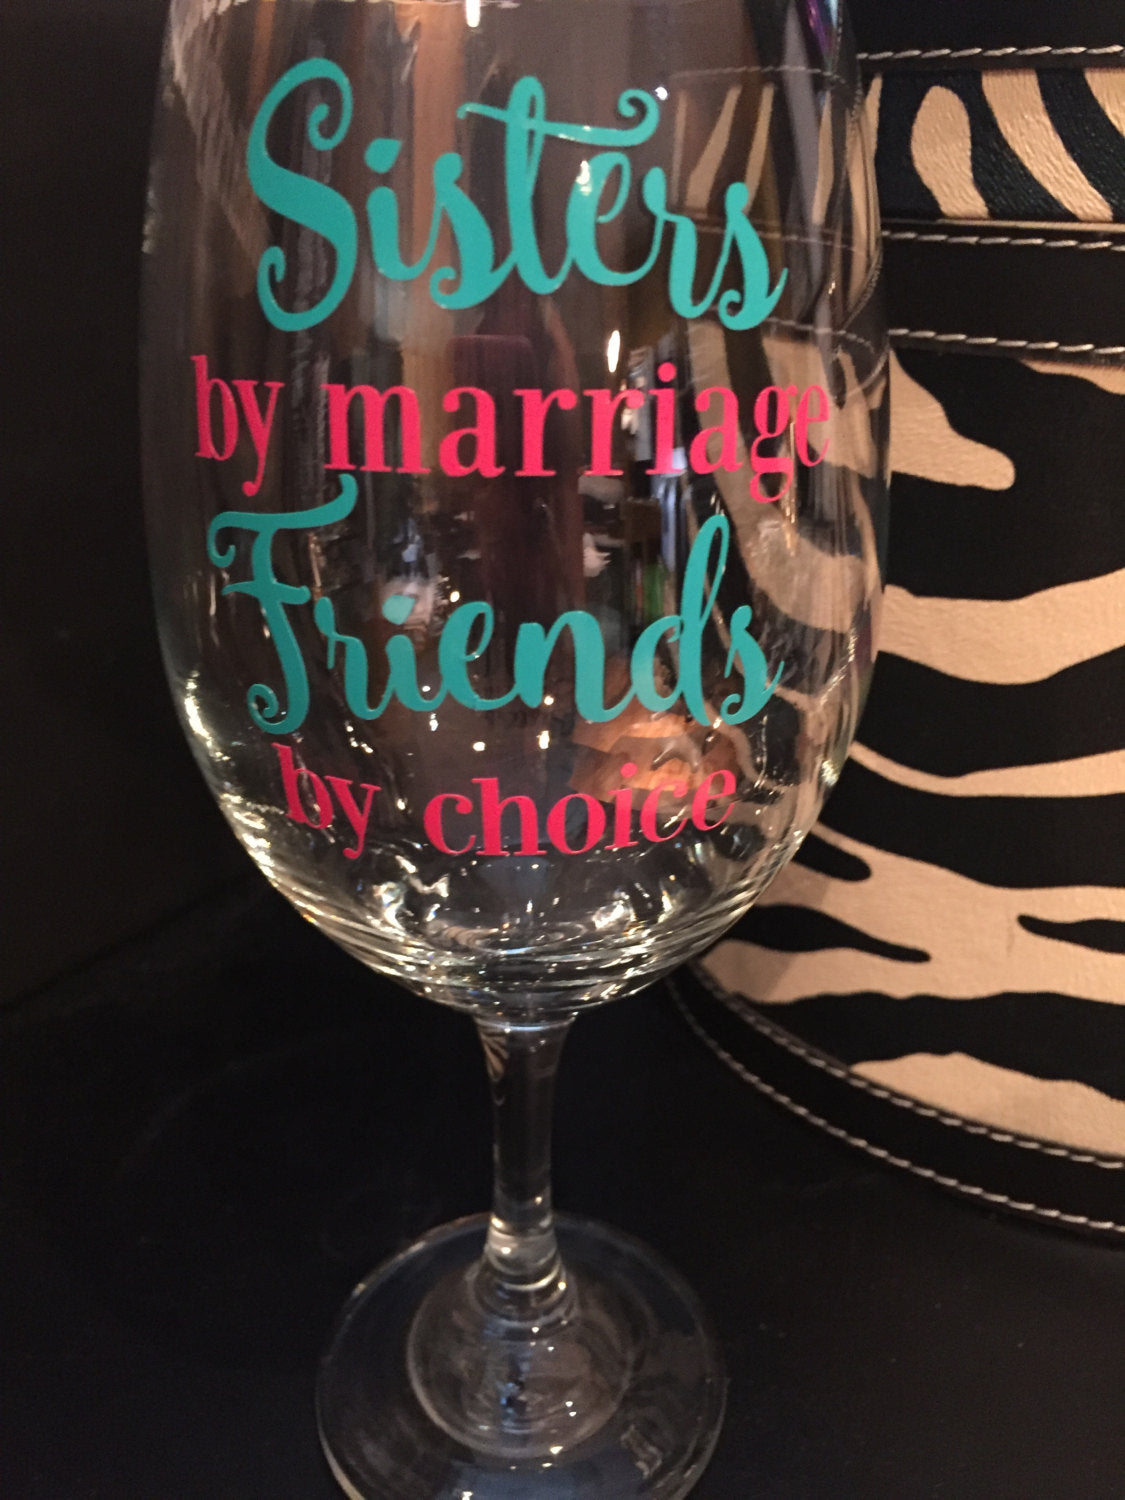 Sister In Law Gift Sisters By Marriage Friends By Choice Sister In Law Mug  | eBay